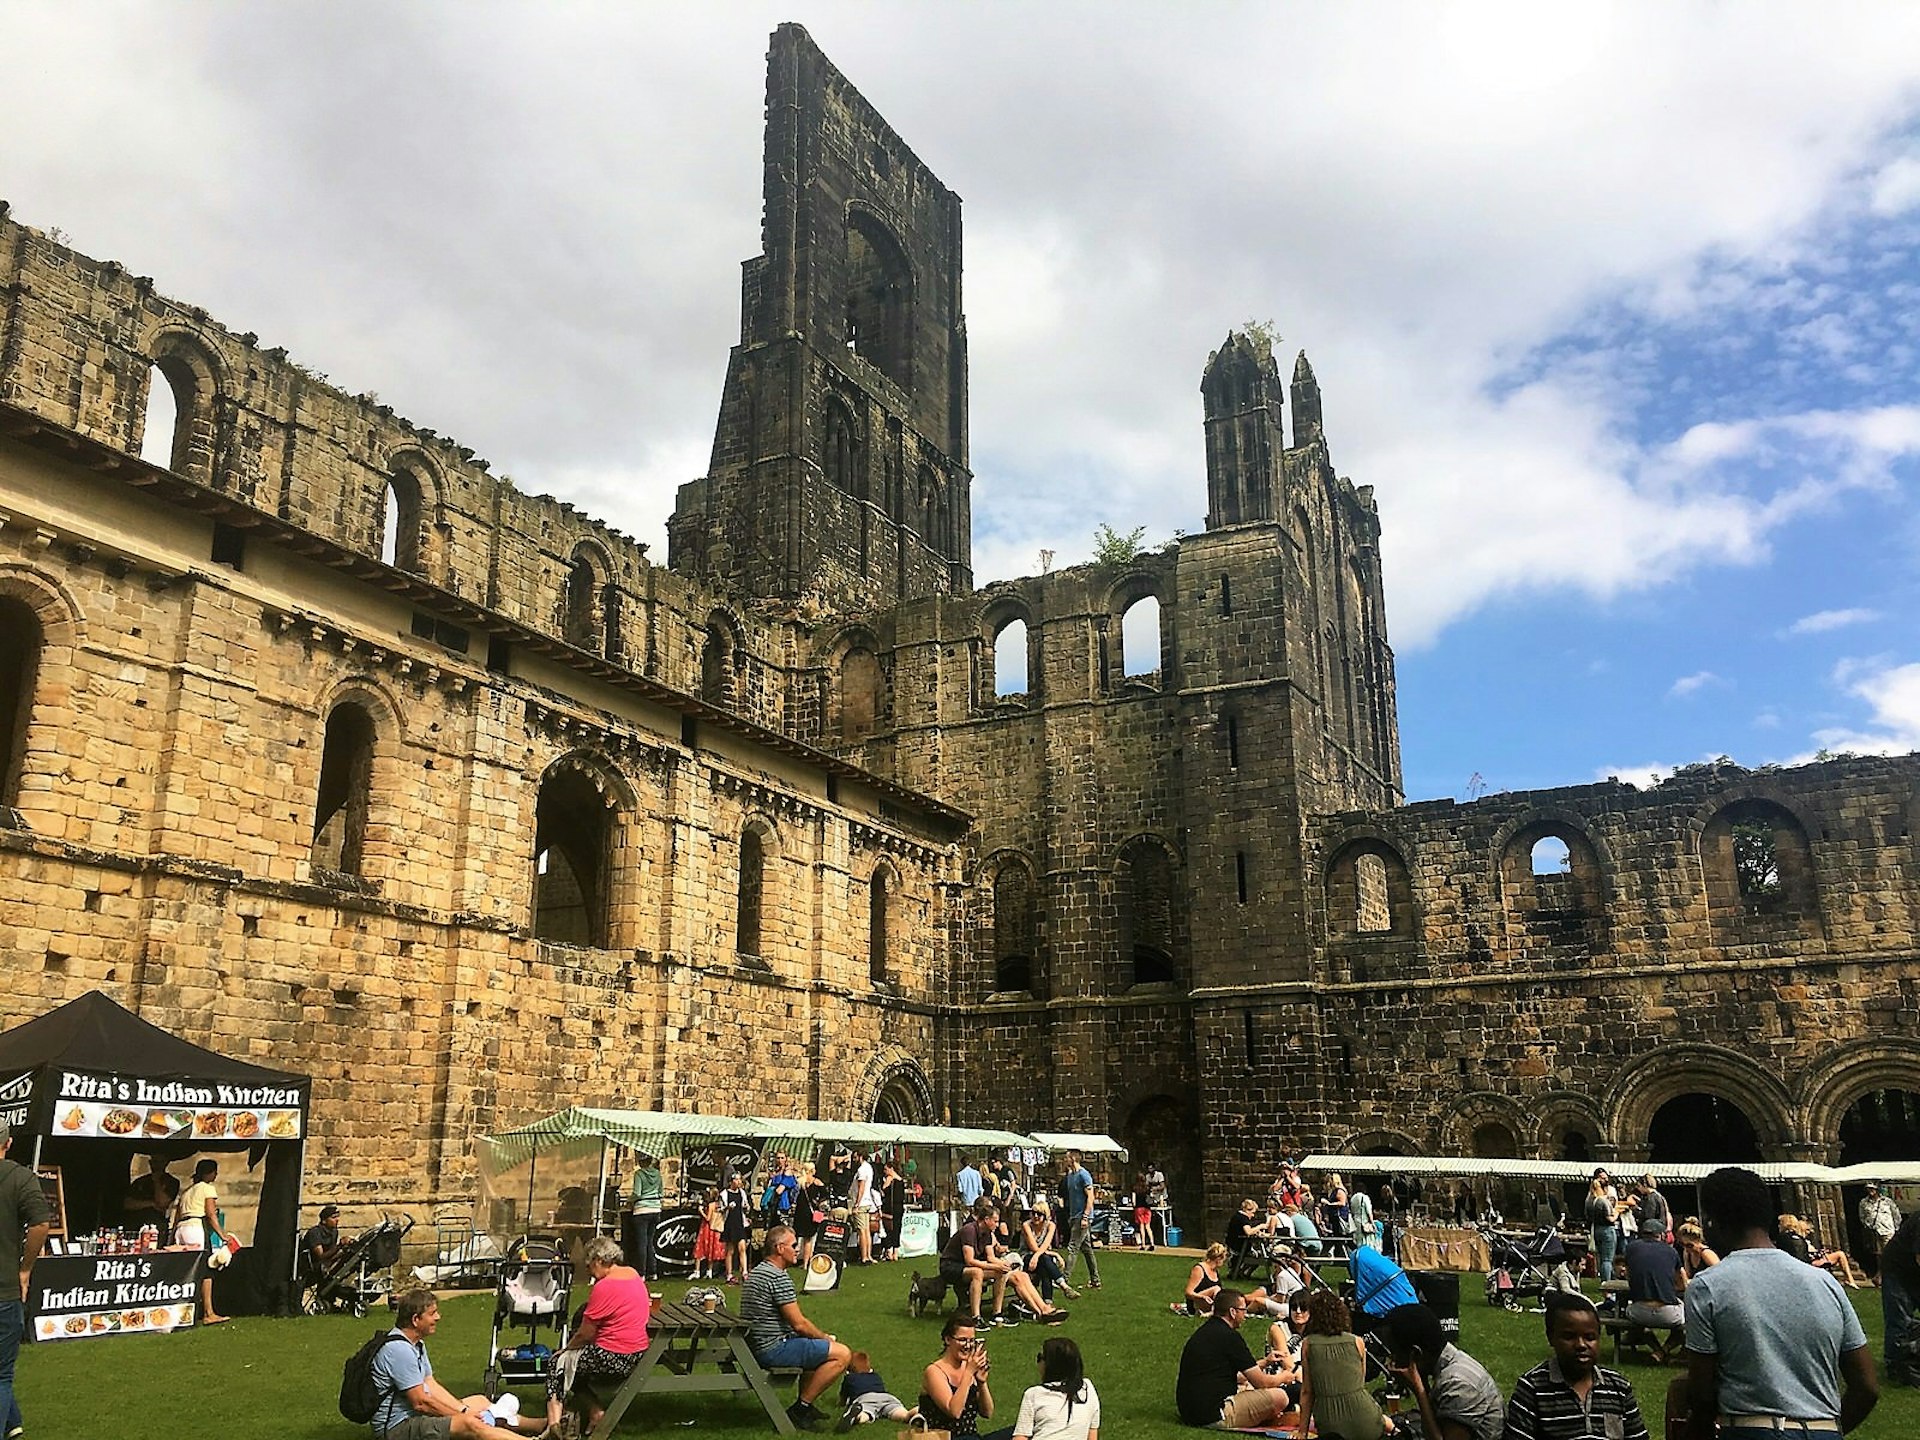 People eating from food stalls in the ruins of Kirkstall Abbey.